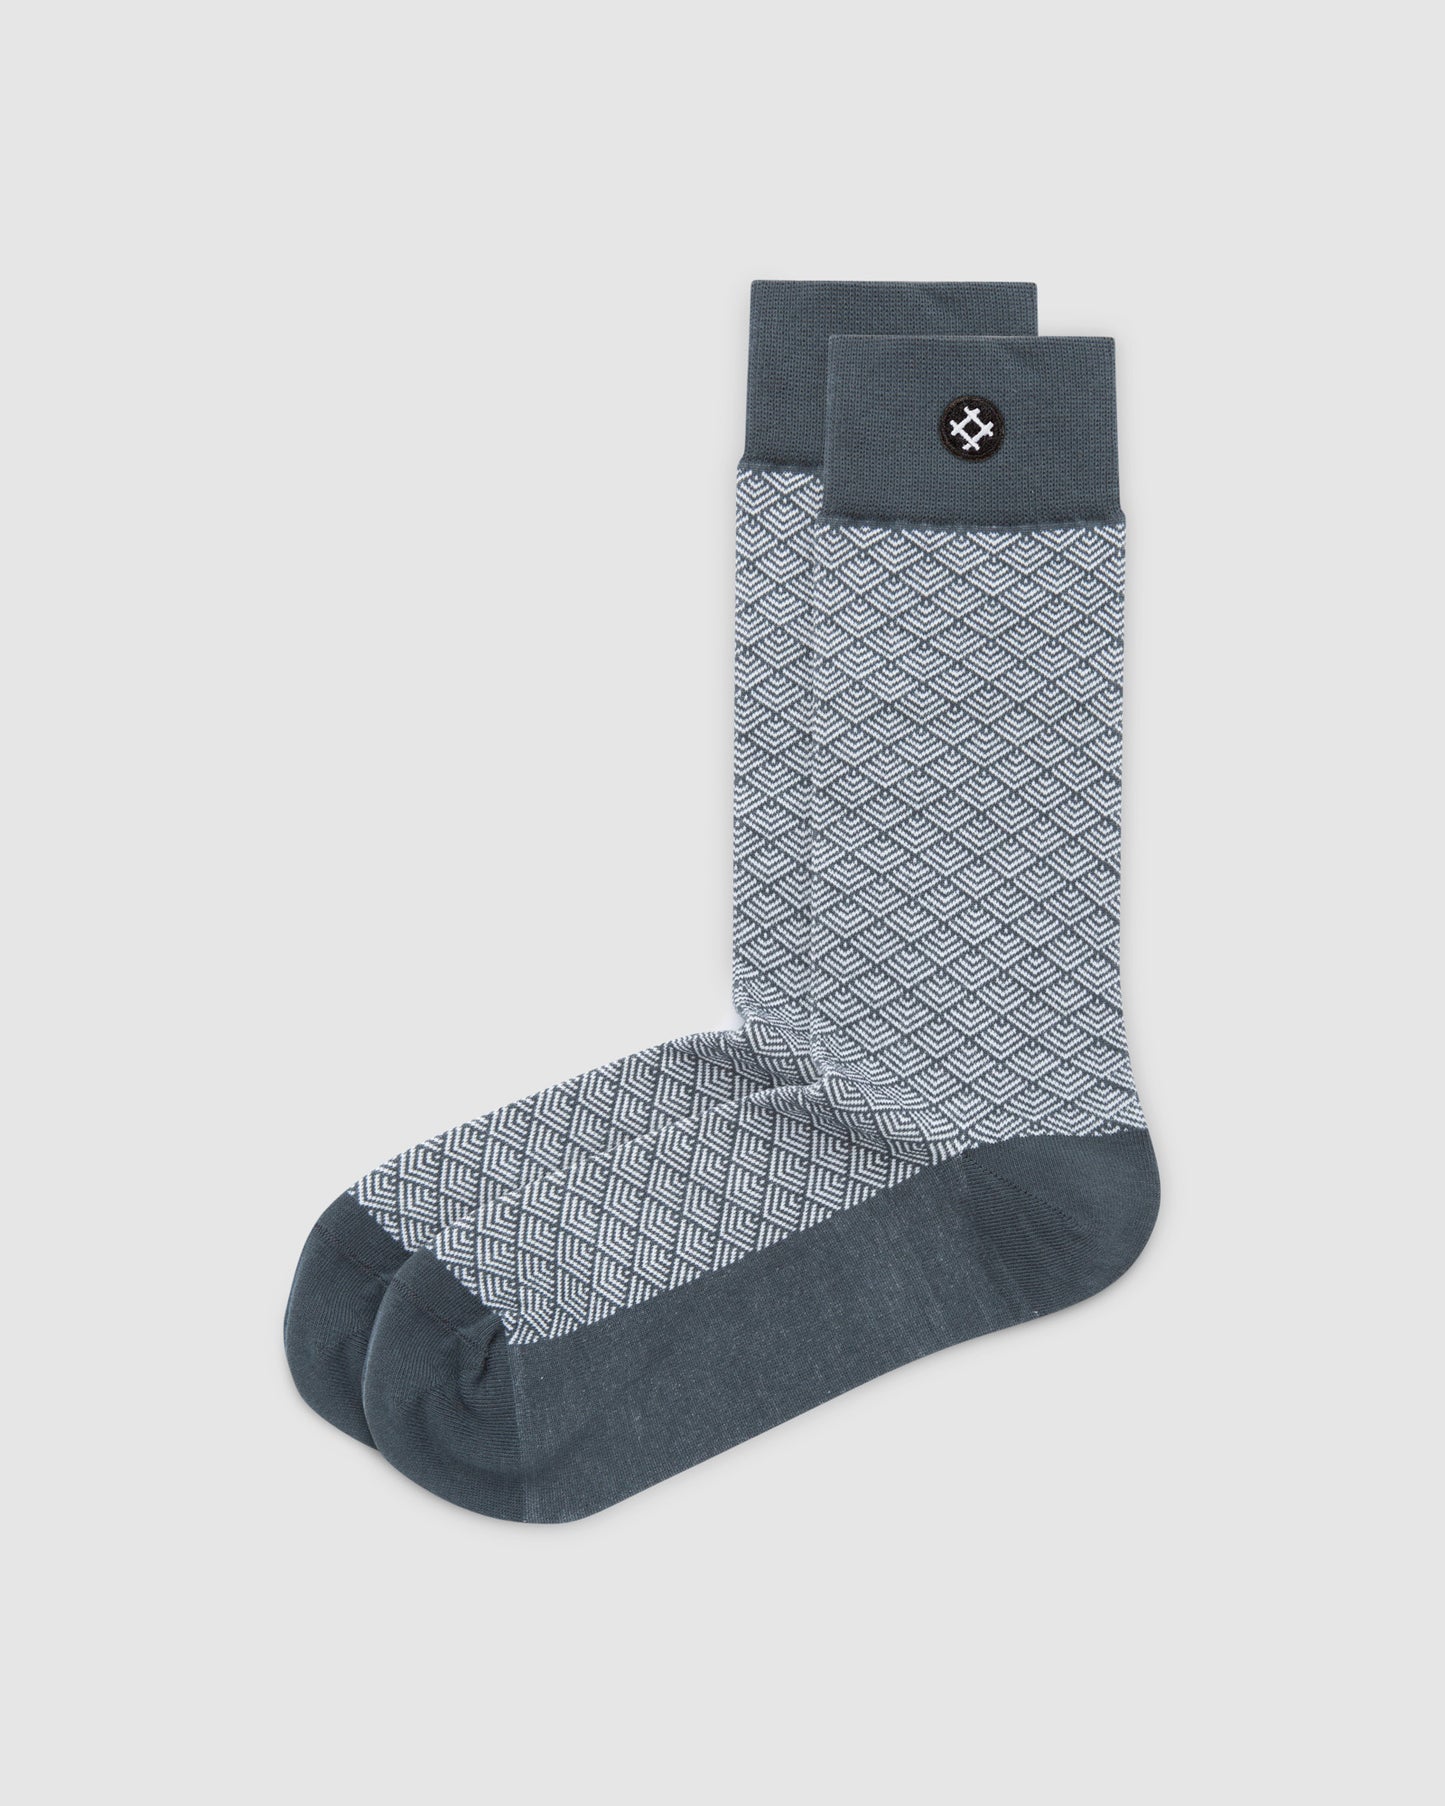 Chained 6 Pack Crew Socks